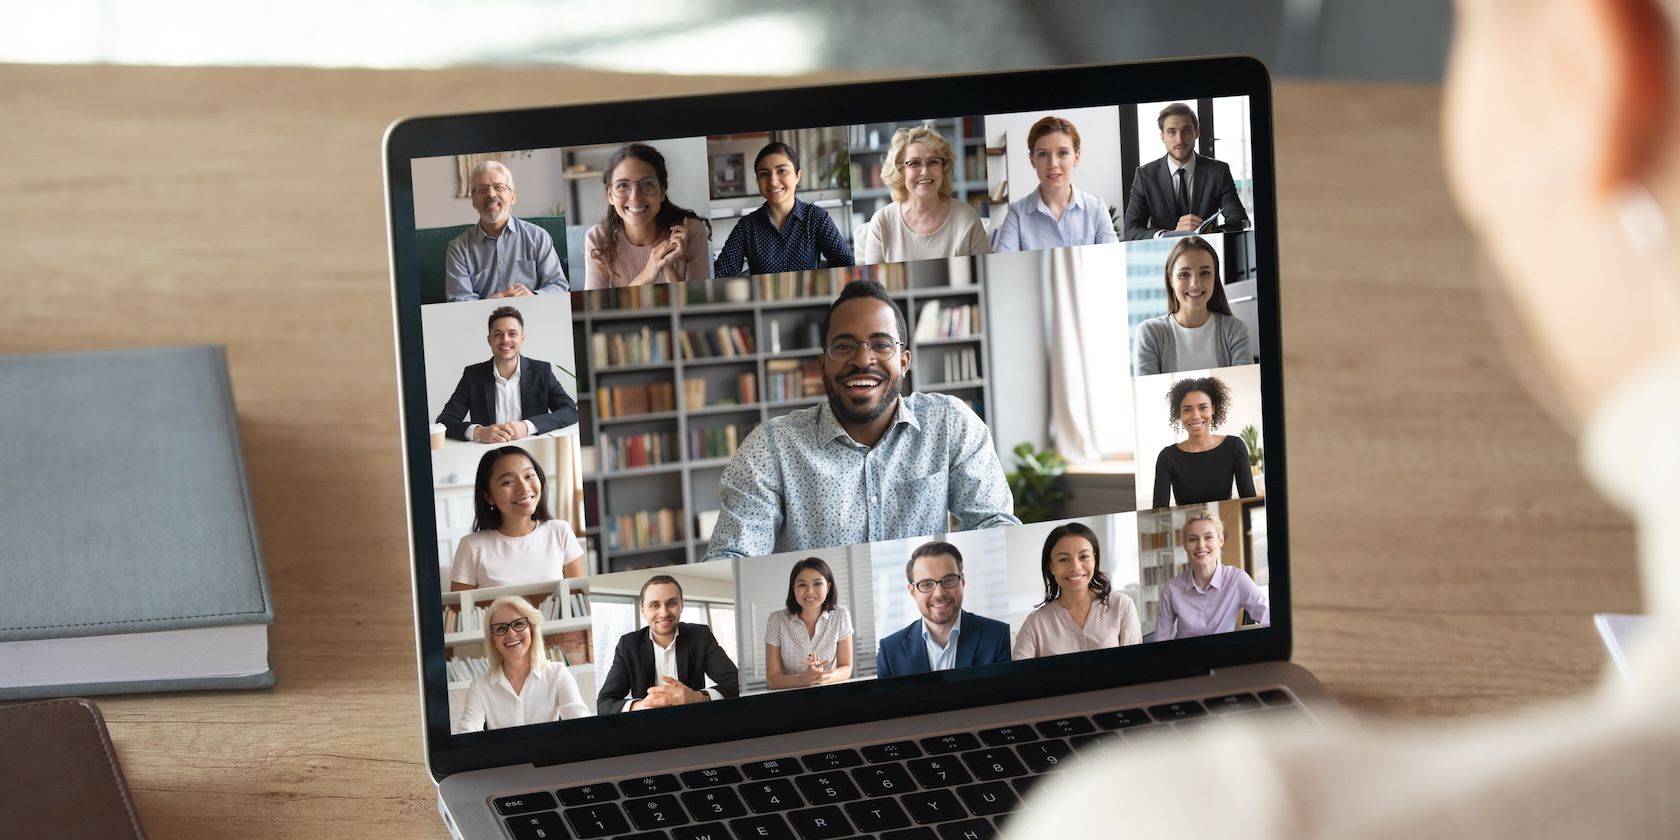 A laptop screen shows a video call with the portraits of many people in small thumbnails surrounding one person in close-up